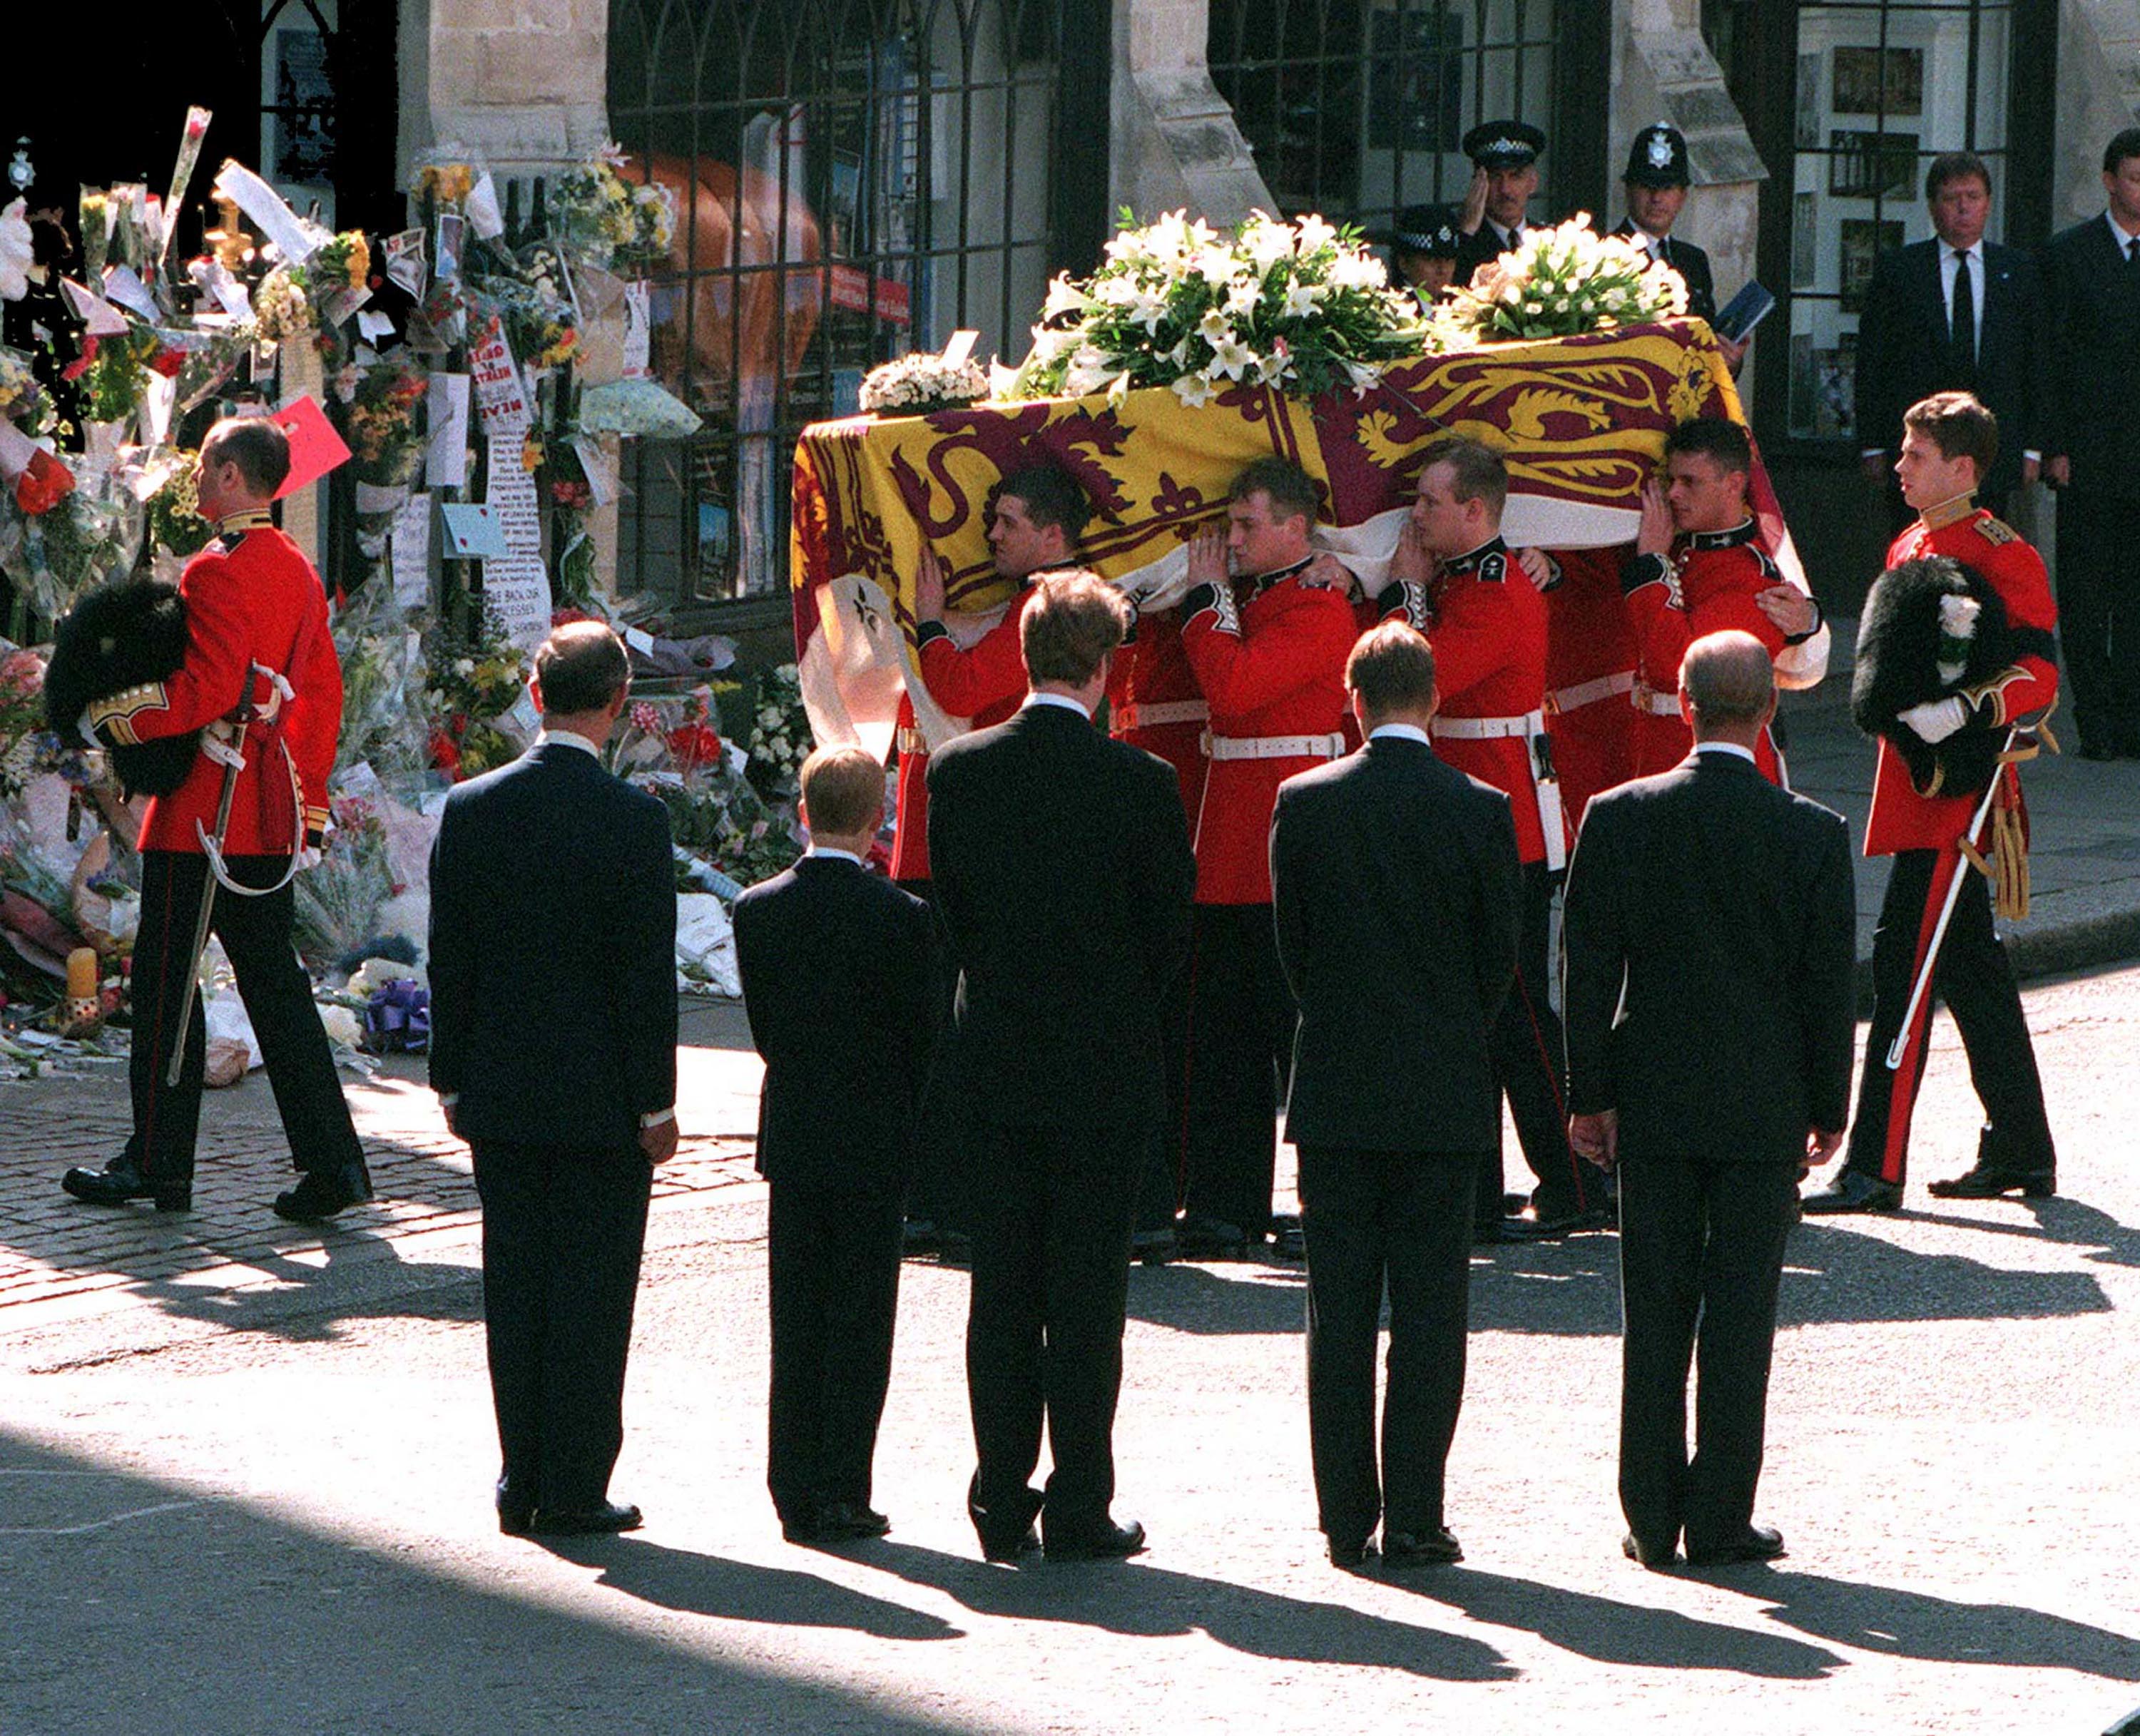 Prince Charles, Prince of Wales, Prince Harry, Earl Spencer, Prince William, and Prince Philip, Duke of Edinburgh during Diana, Princess of Wales' funeral on September 6, 1997 at Westminster Abbey, London | Source: Getty Images